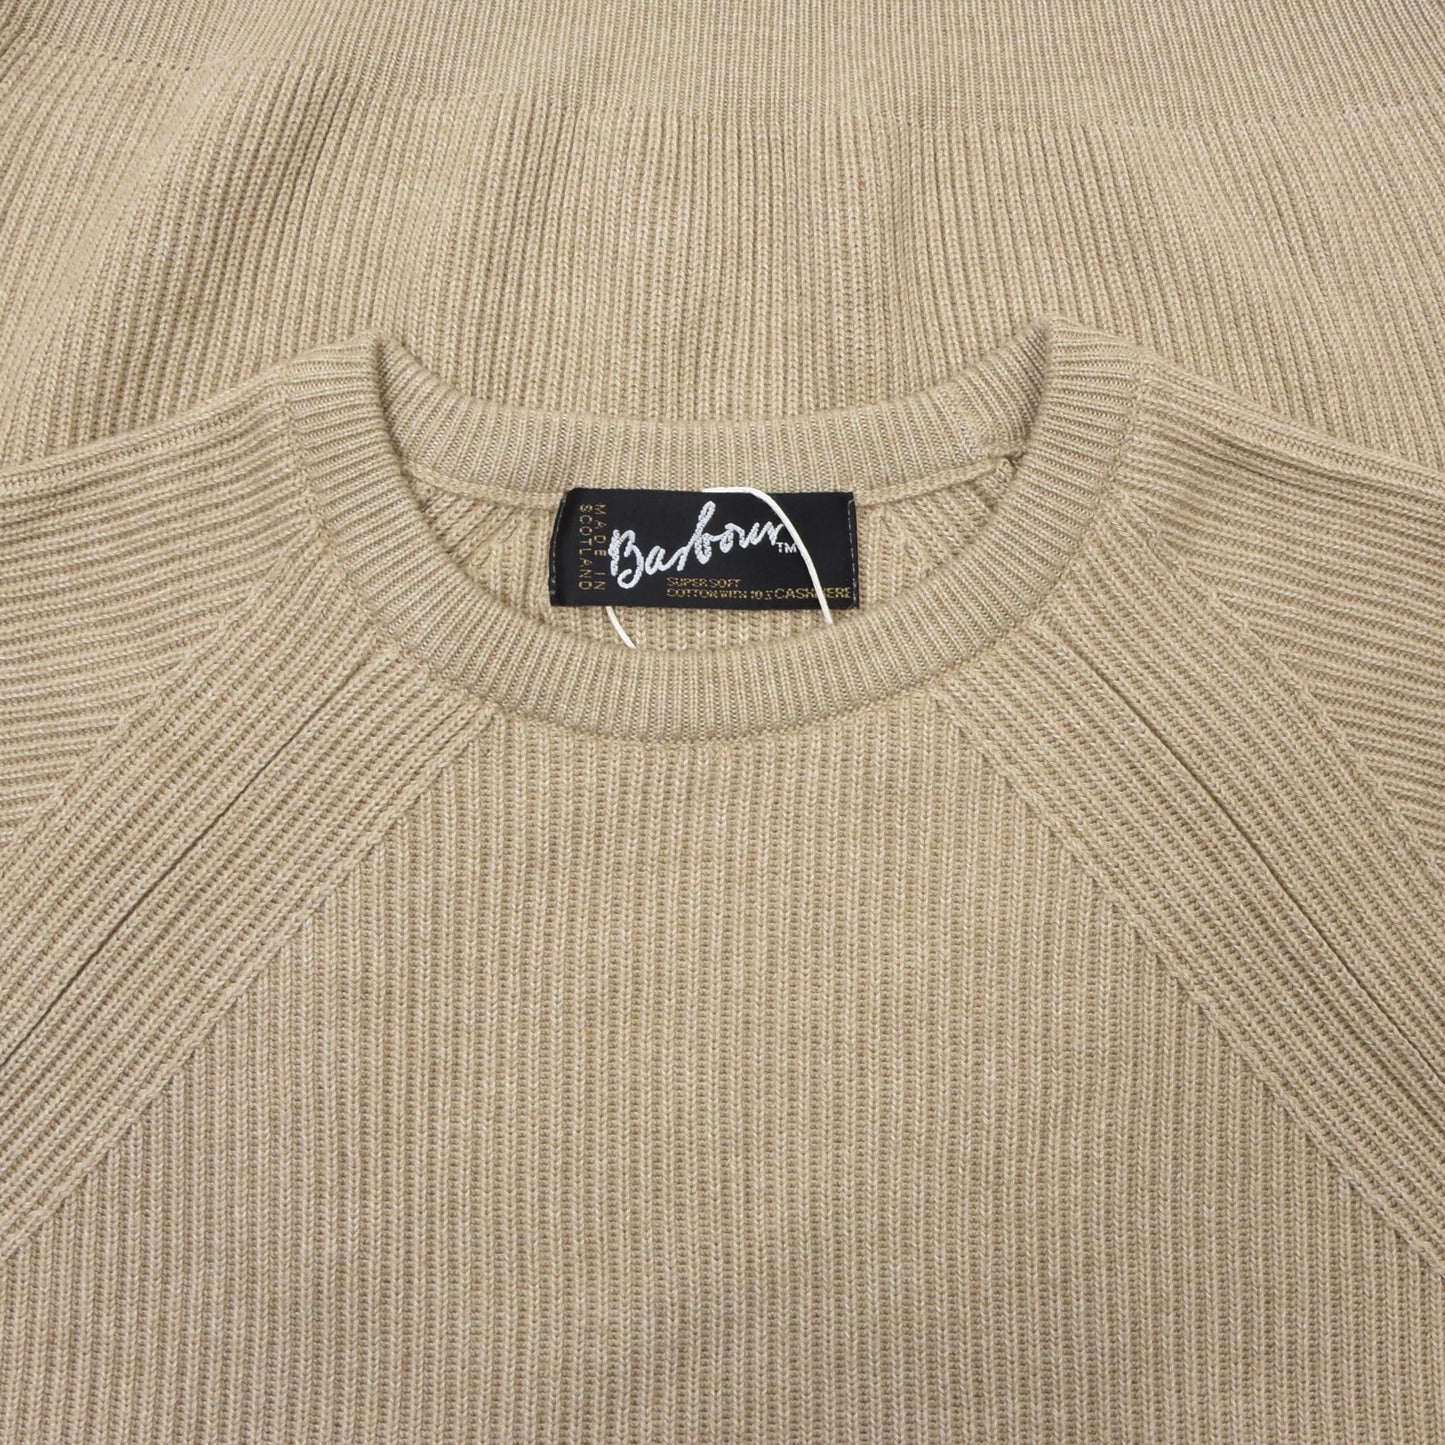 Barbour D827 Ribbed Sweater Size S - Beige